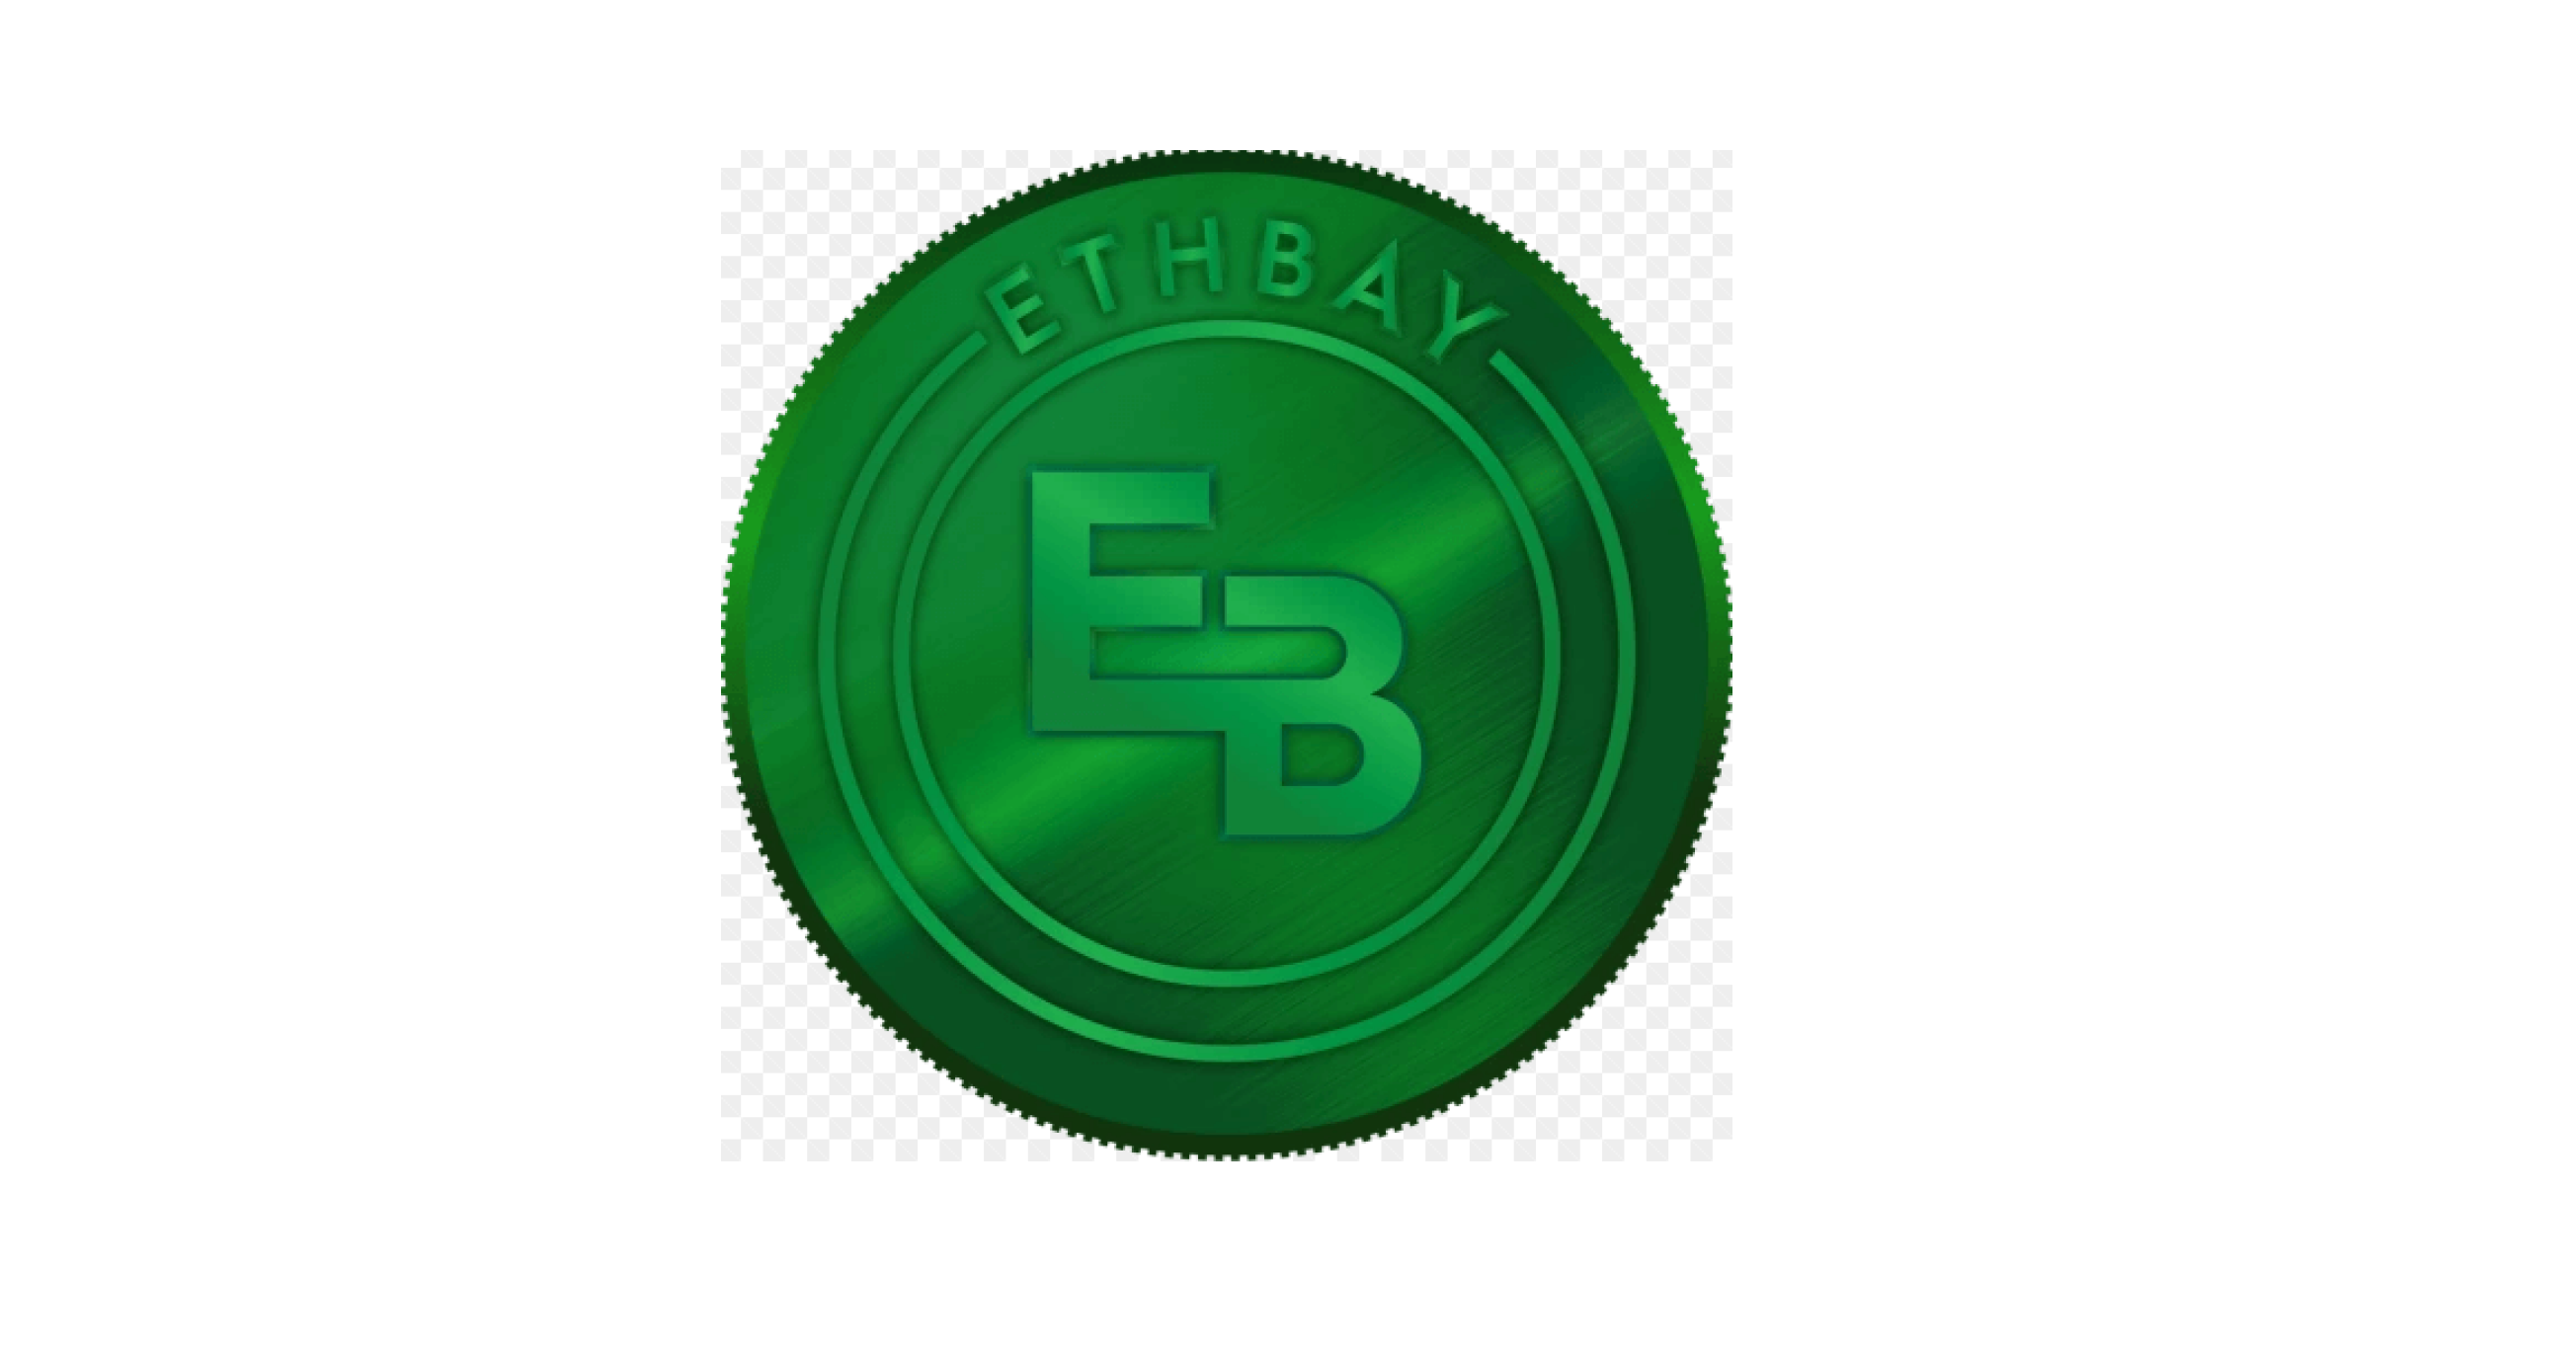 Ethbay, the New Decentralized Ethereum Marketplace Will Launch Their ICO on June 7th